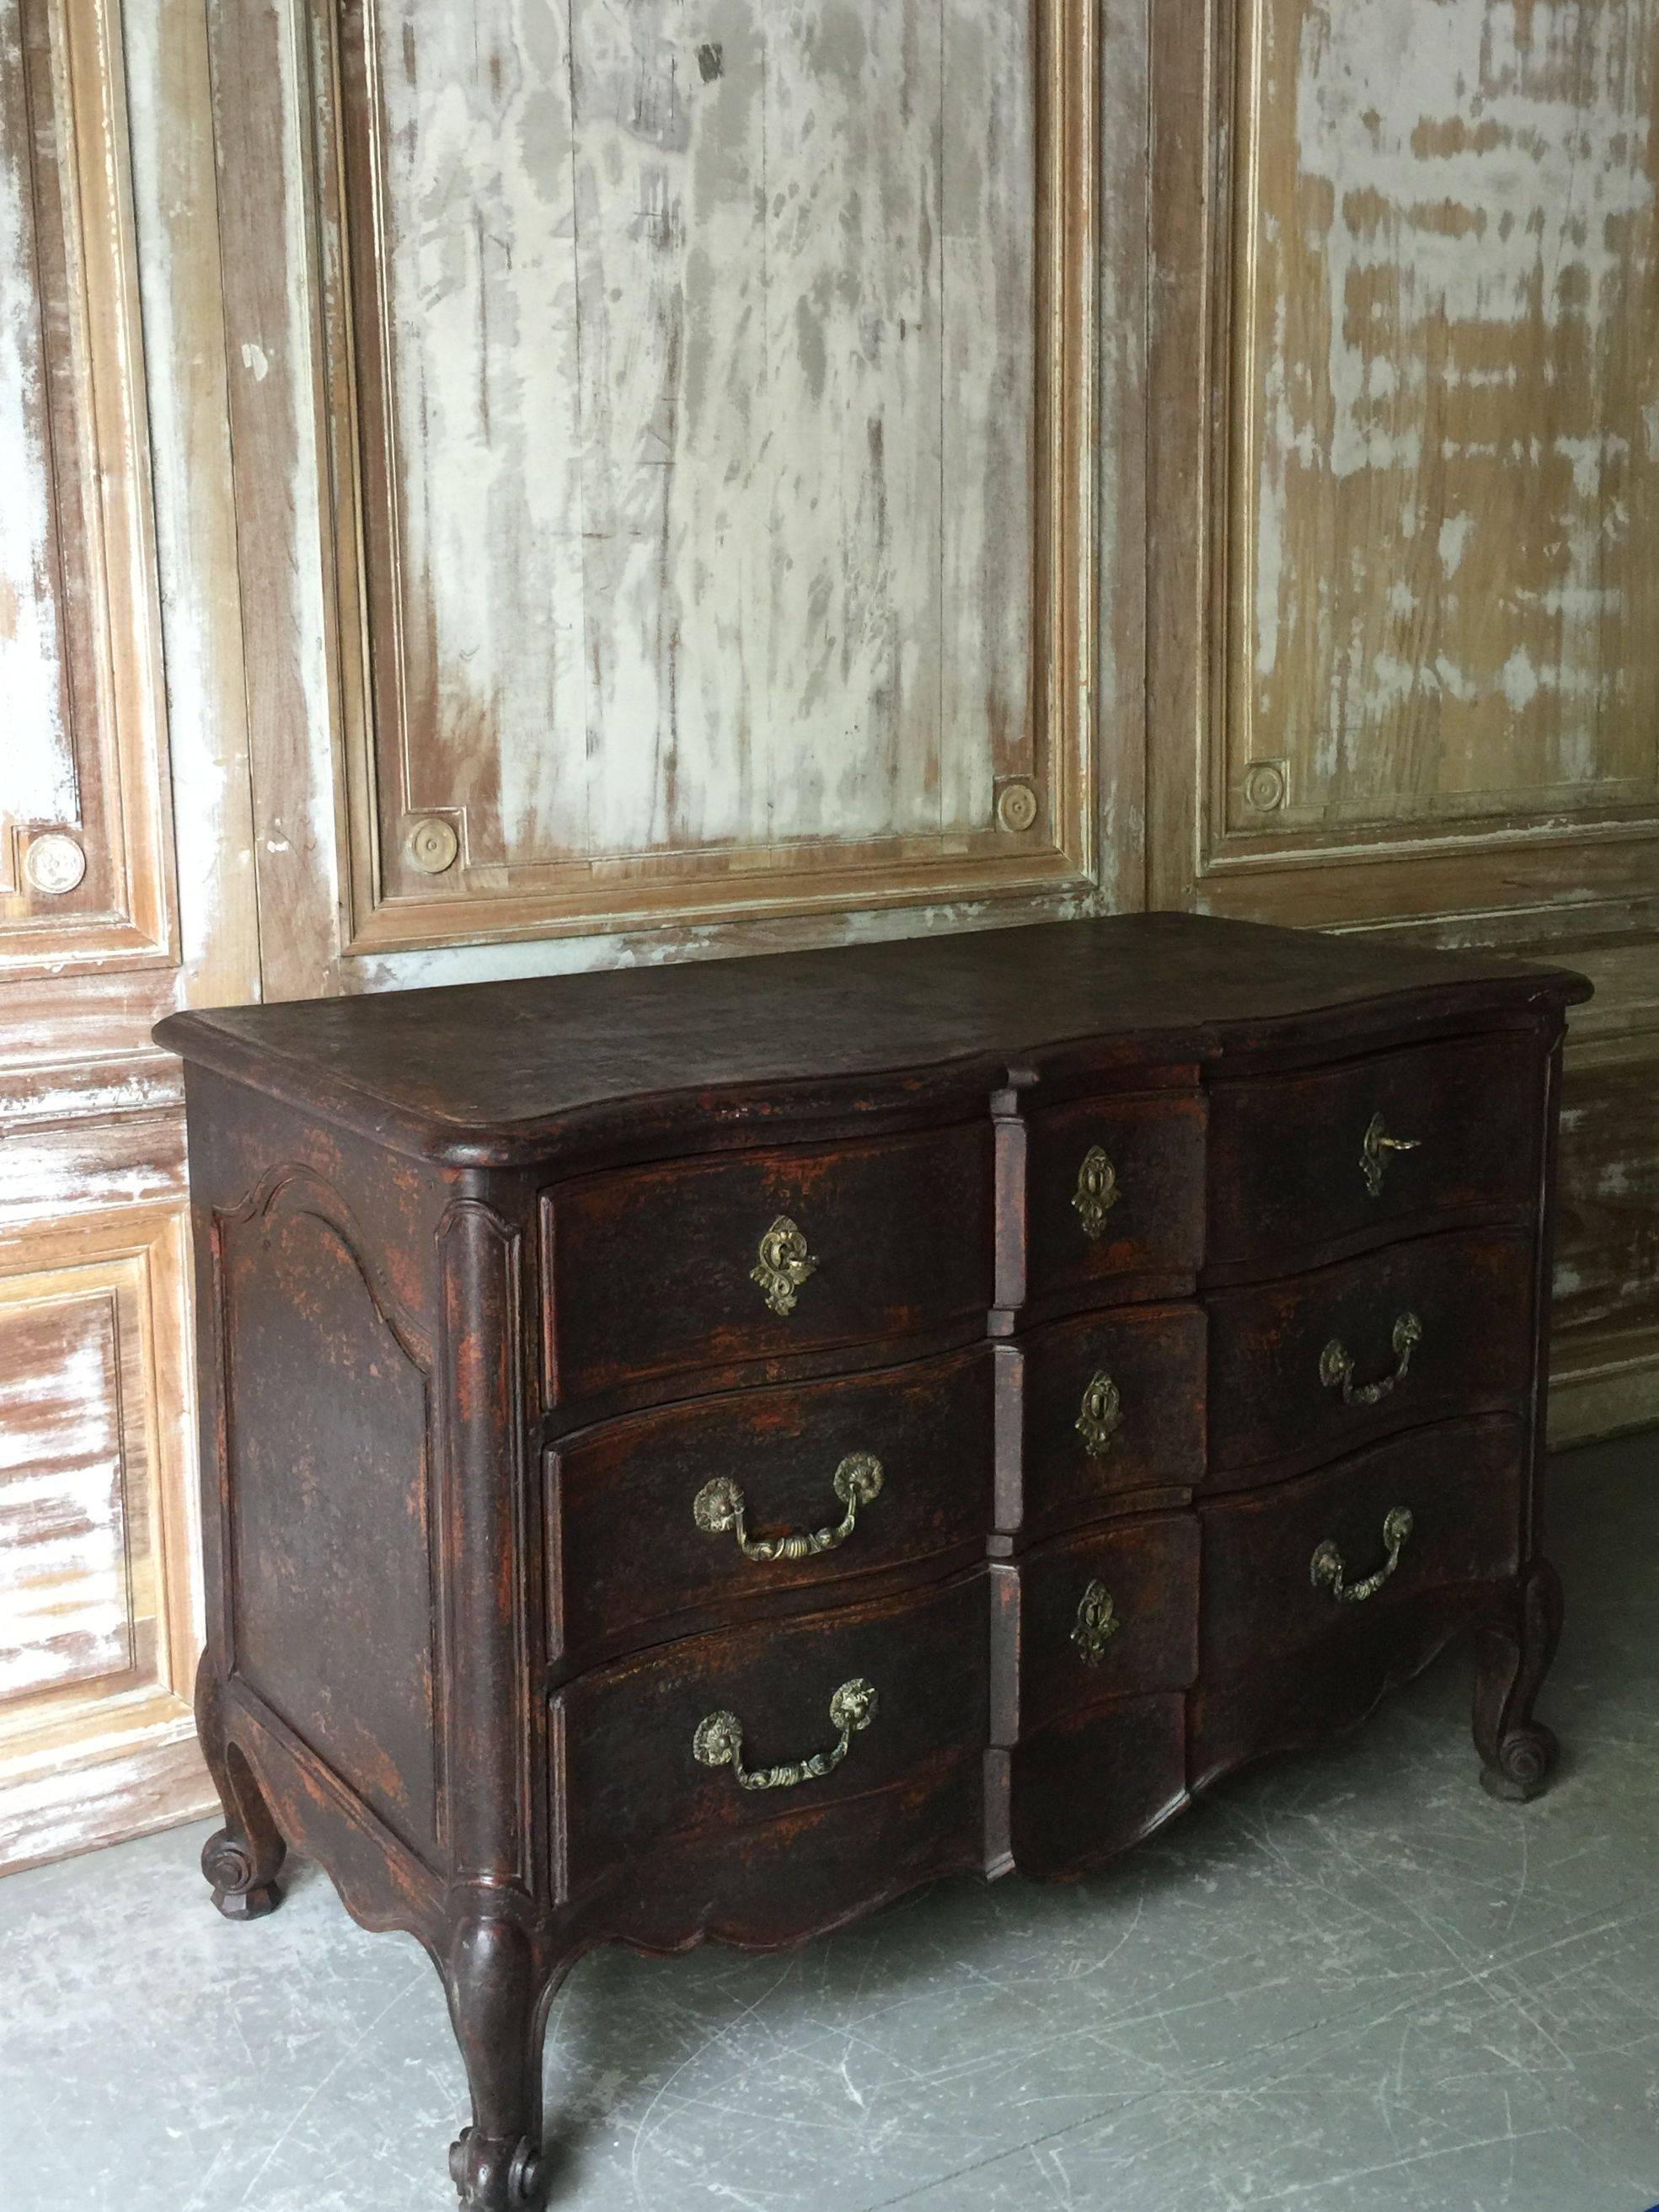 An exquisite and richly carved serpentine fronted French commode from the early 19th century Louis XV style in original worn patina.
France, circa 1810.

Here are few examples surprising pieces and objects, authentic, decorative and rare items